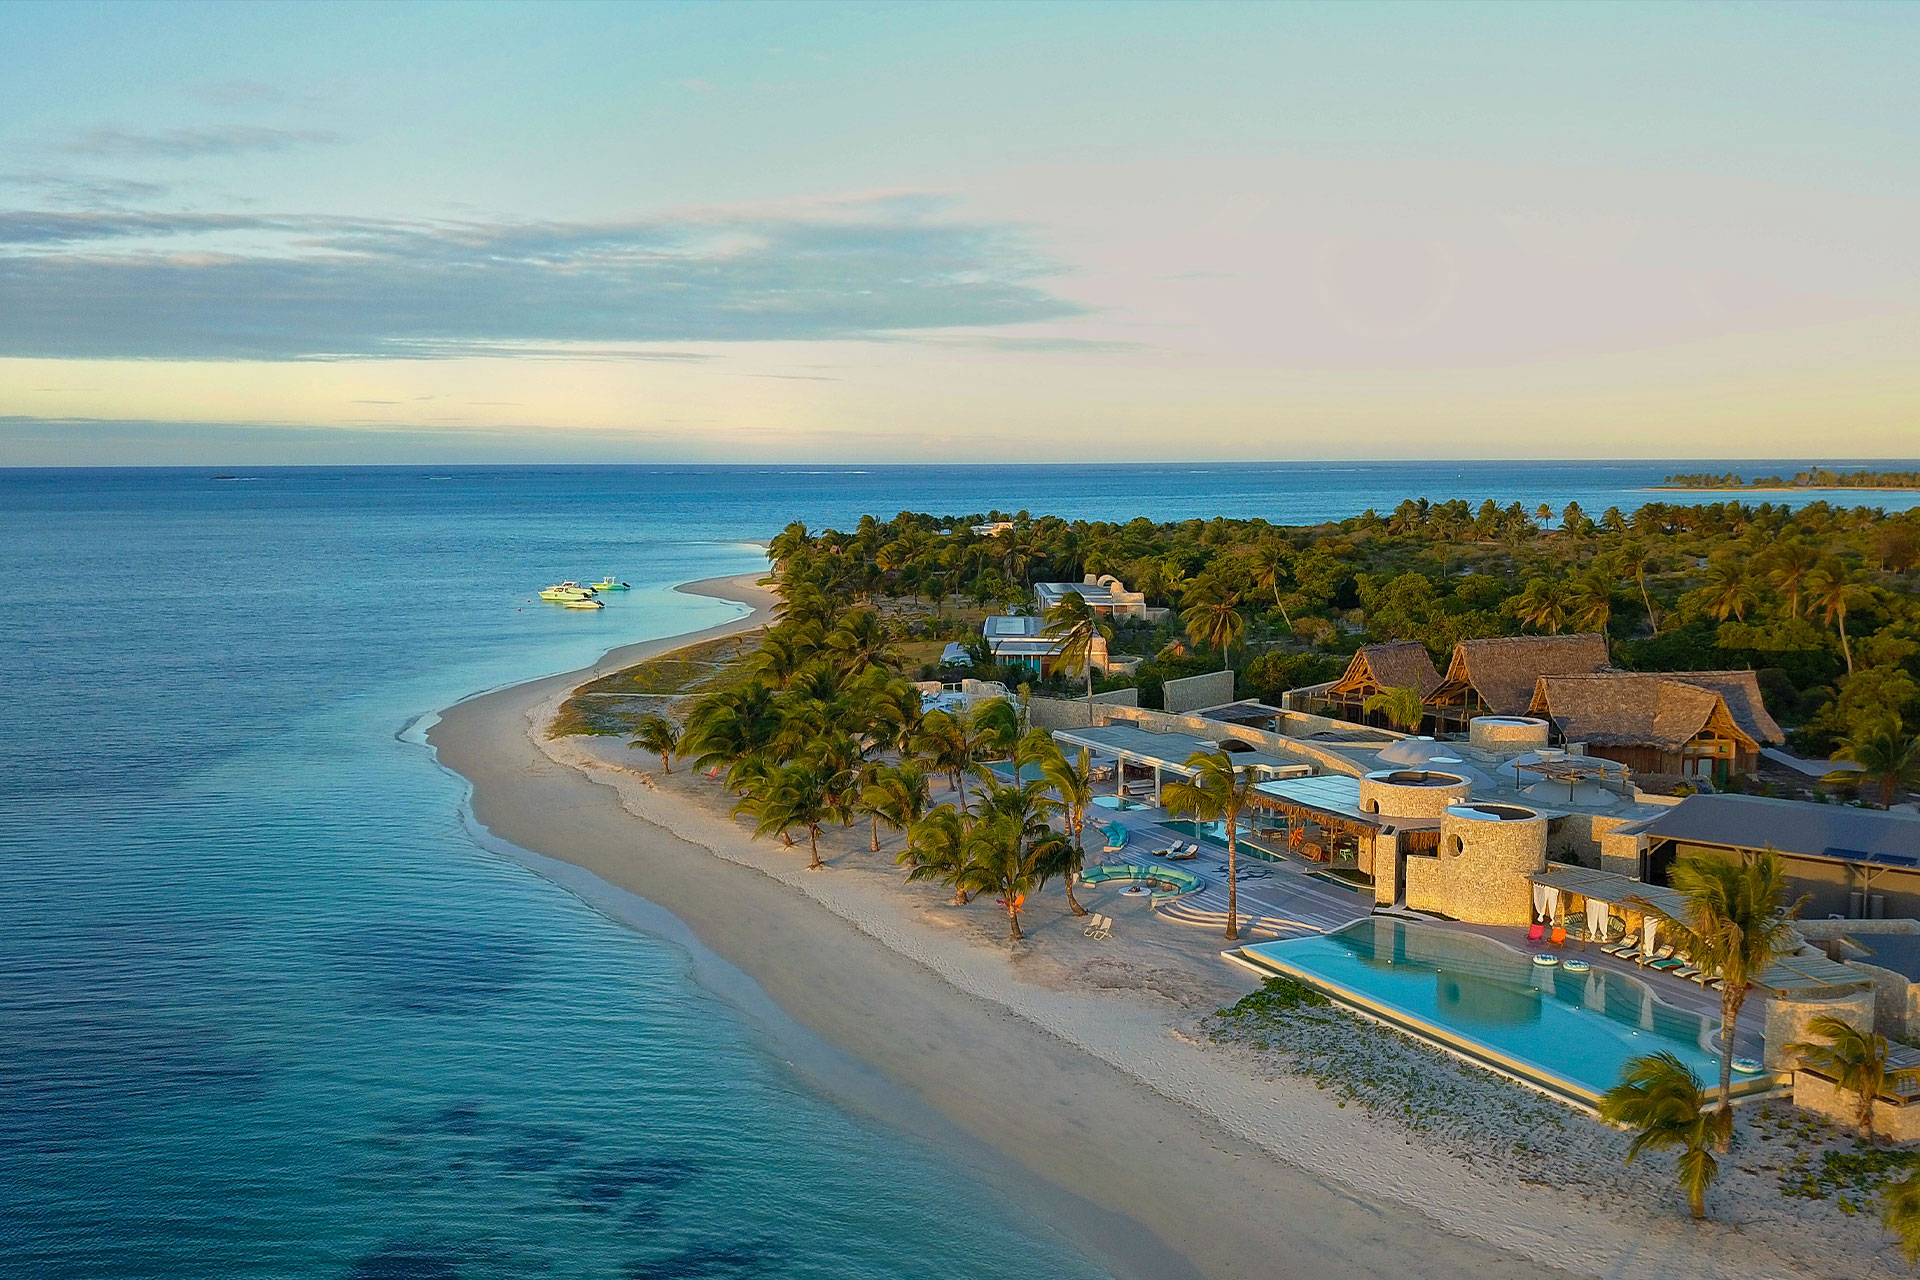 Aerial view of Time + Tide Miavana located on a remote private island off the coast of Madagascar.